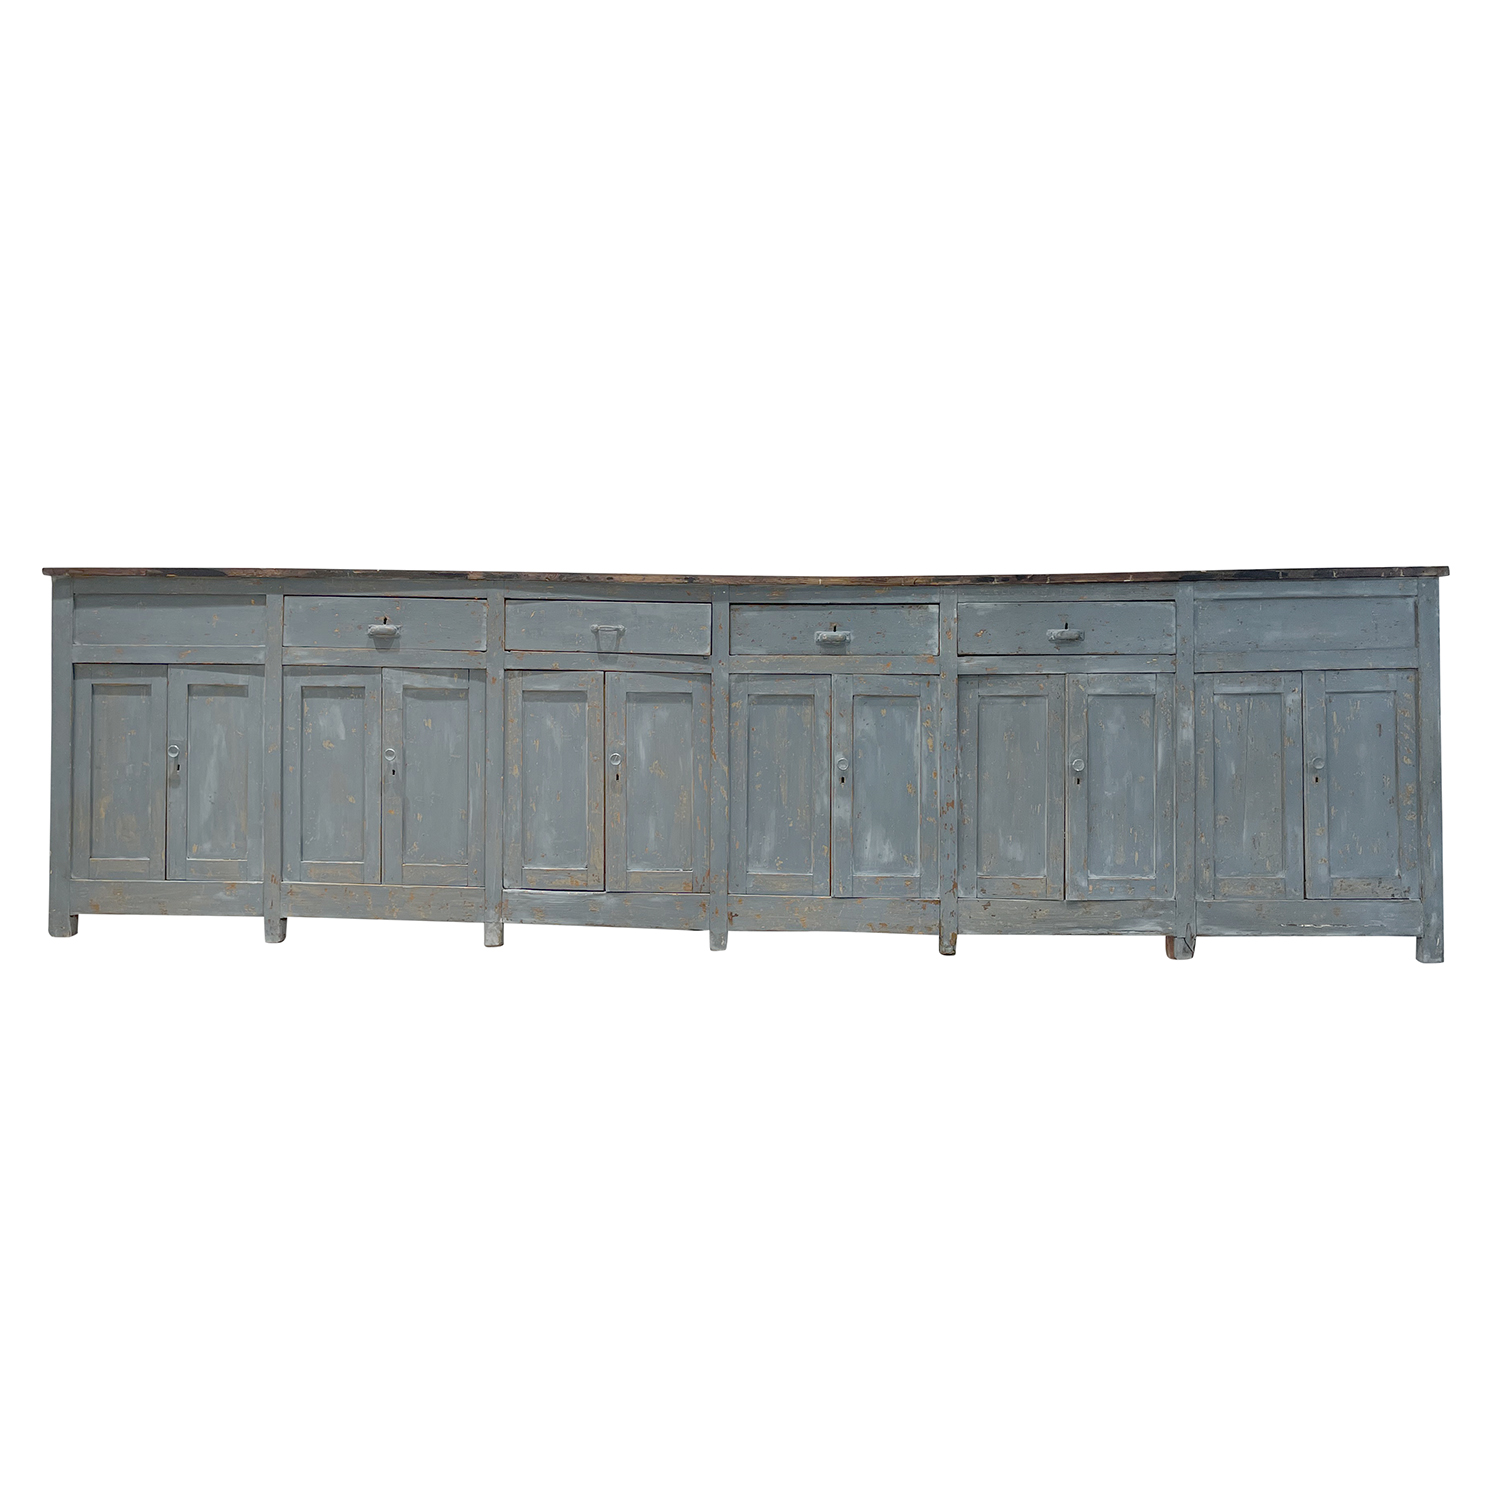 19th Century Grey-Blue French Provencal Pinewood Credenza – Antique Sideboard